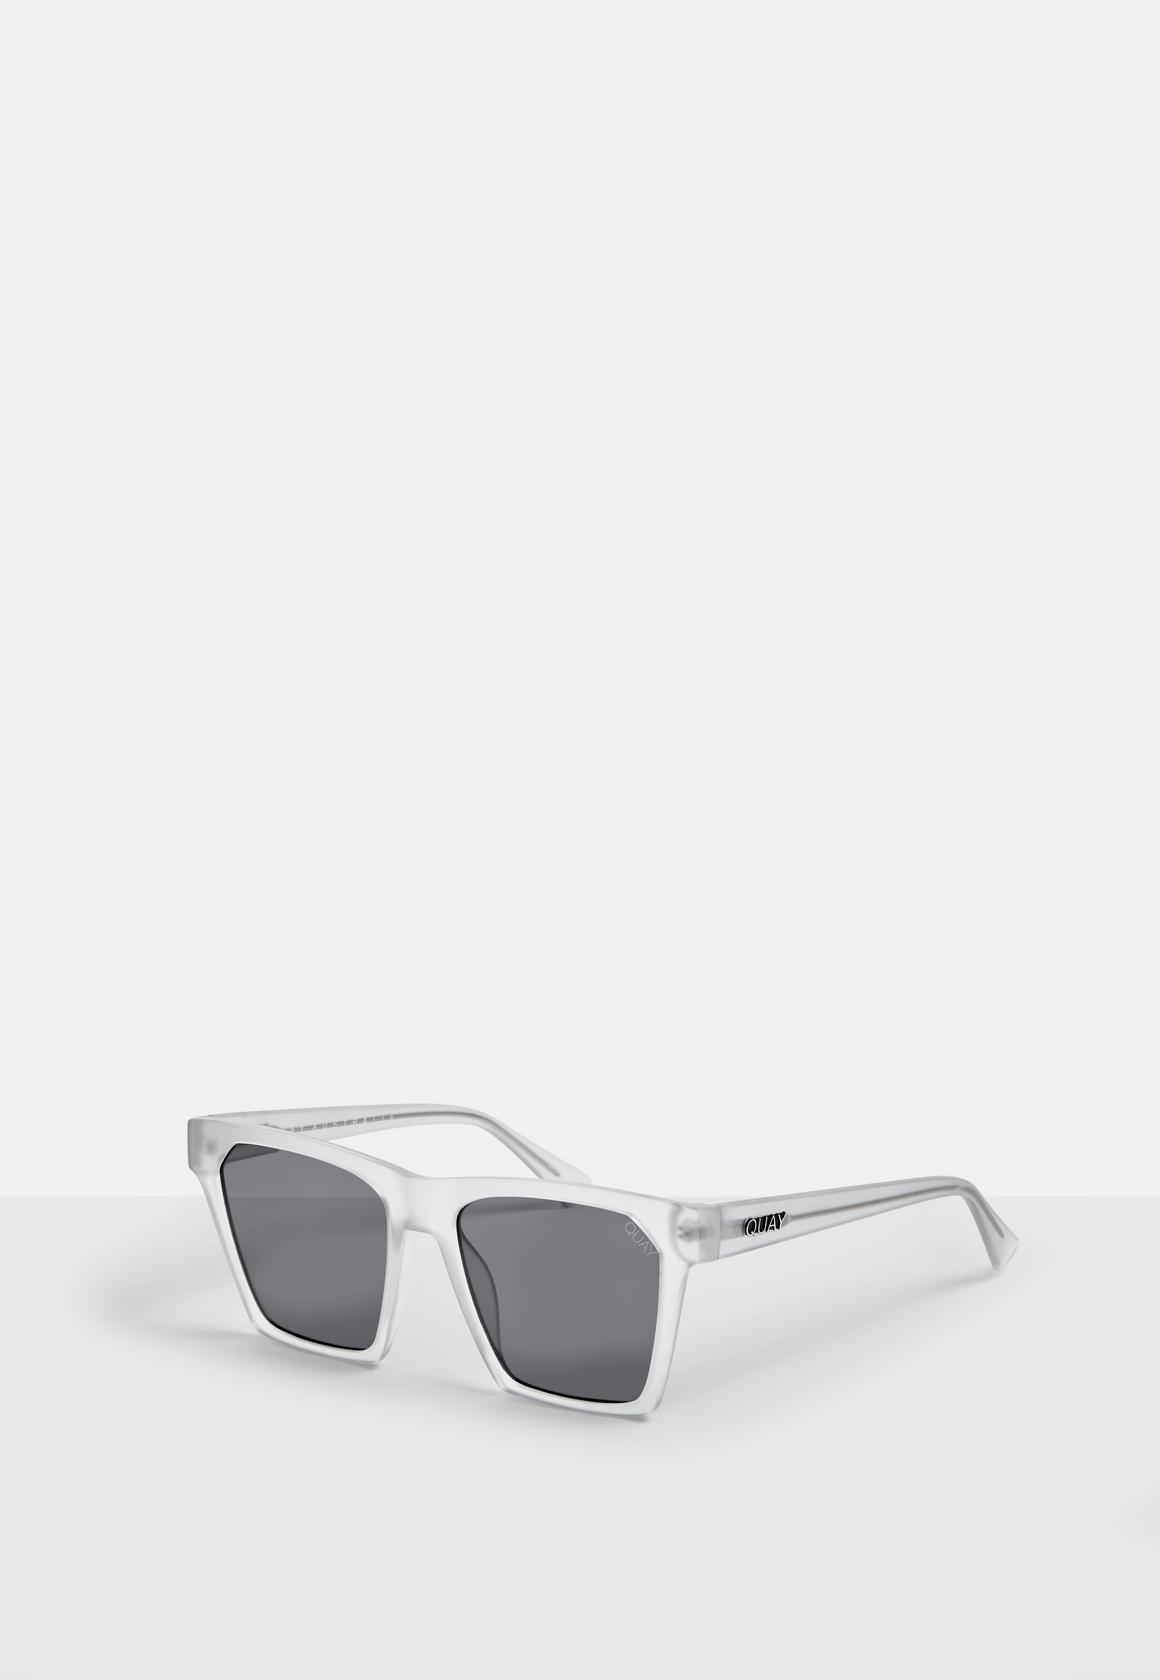 Frosted white sunglasses